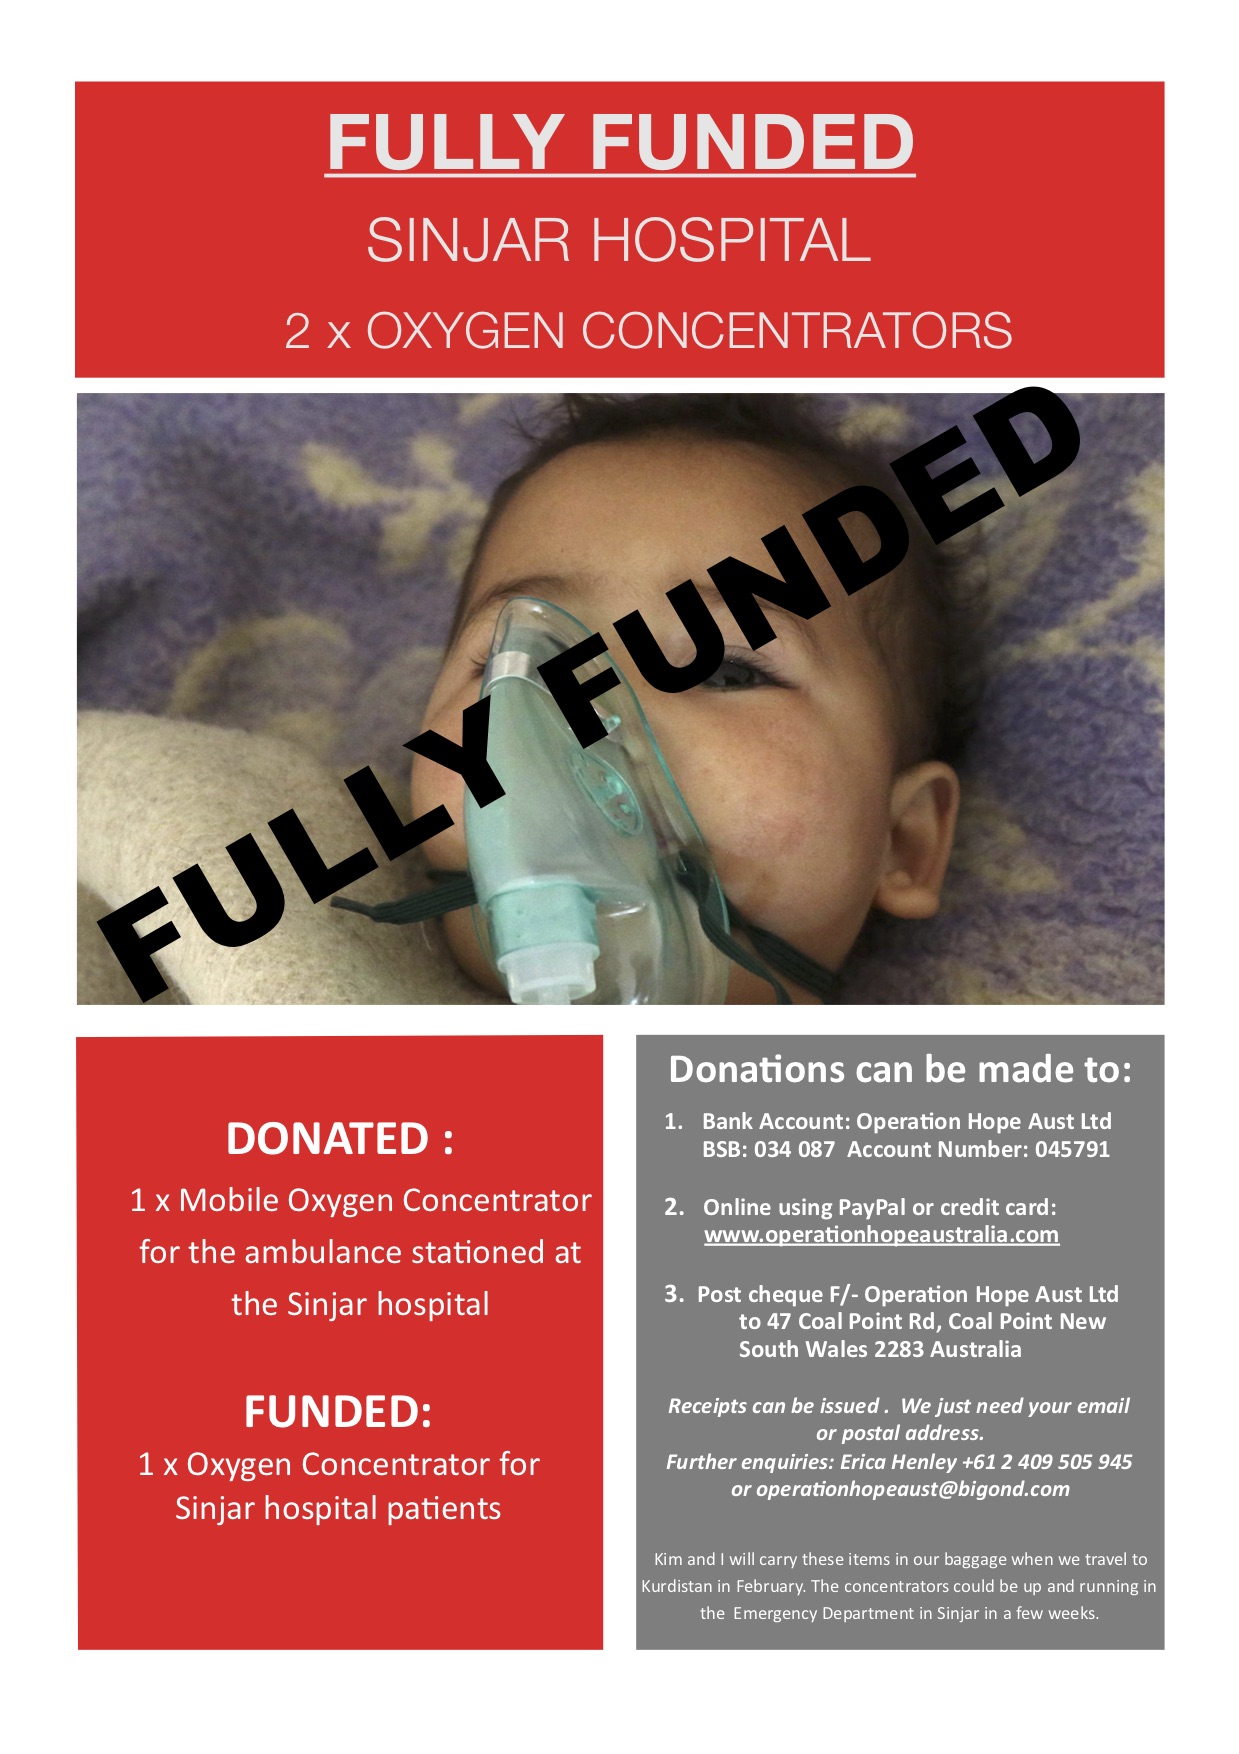 FULLY FUNDED: 2 x Oxygen Concentrators for Sinjar Hospital